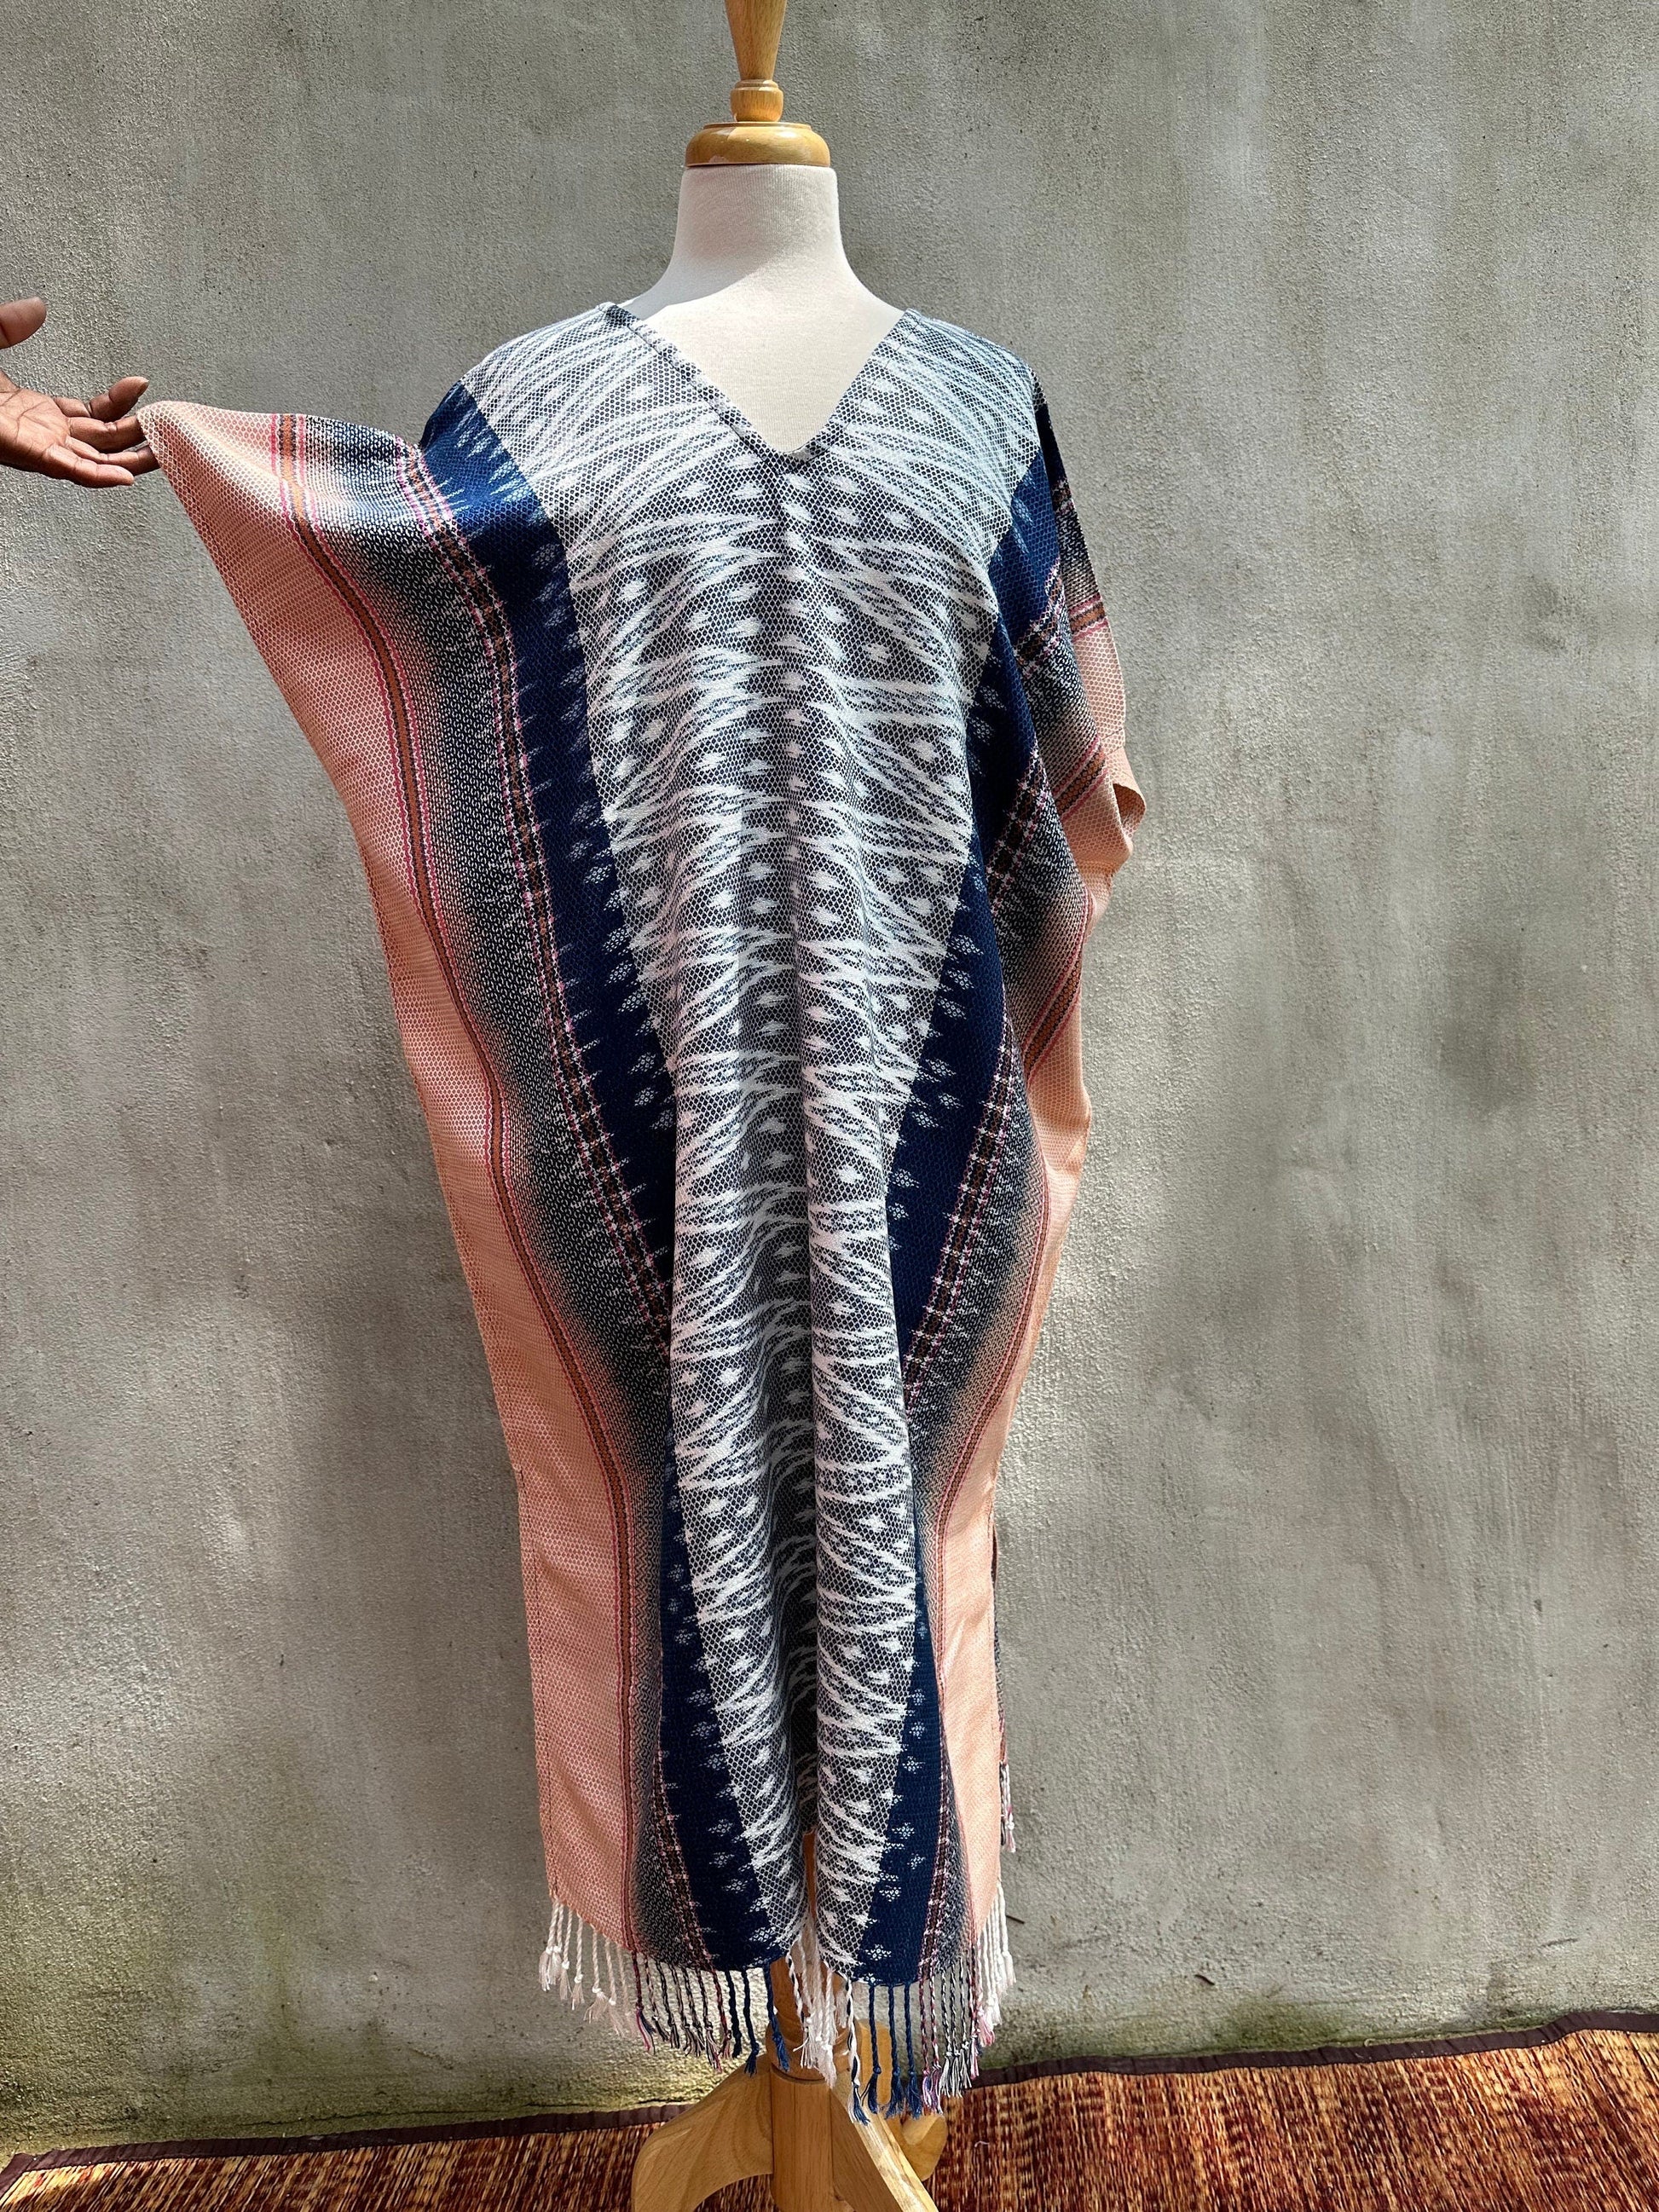 MALA handworks  Ikat Hand Woven Pattern Kaftan in Indigo Blue with Salmon Pink and White